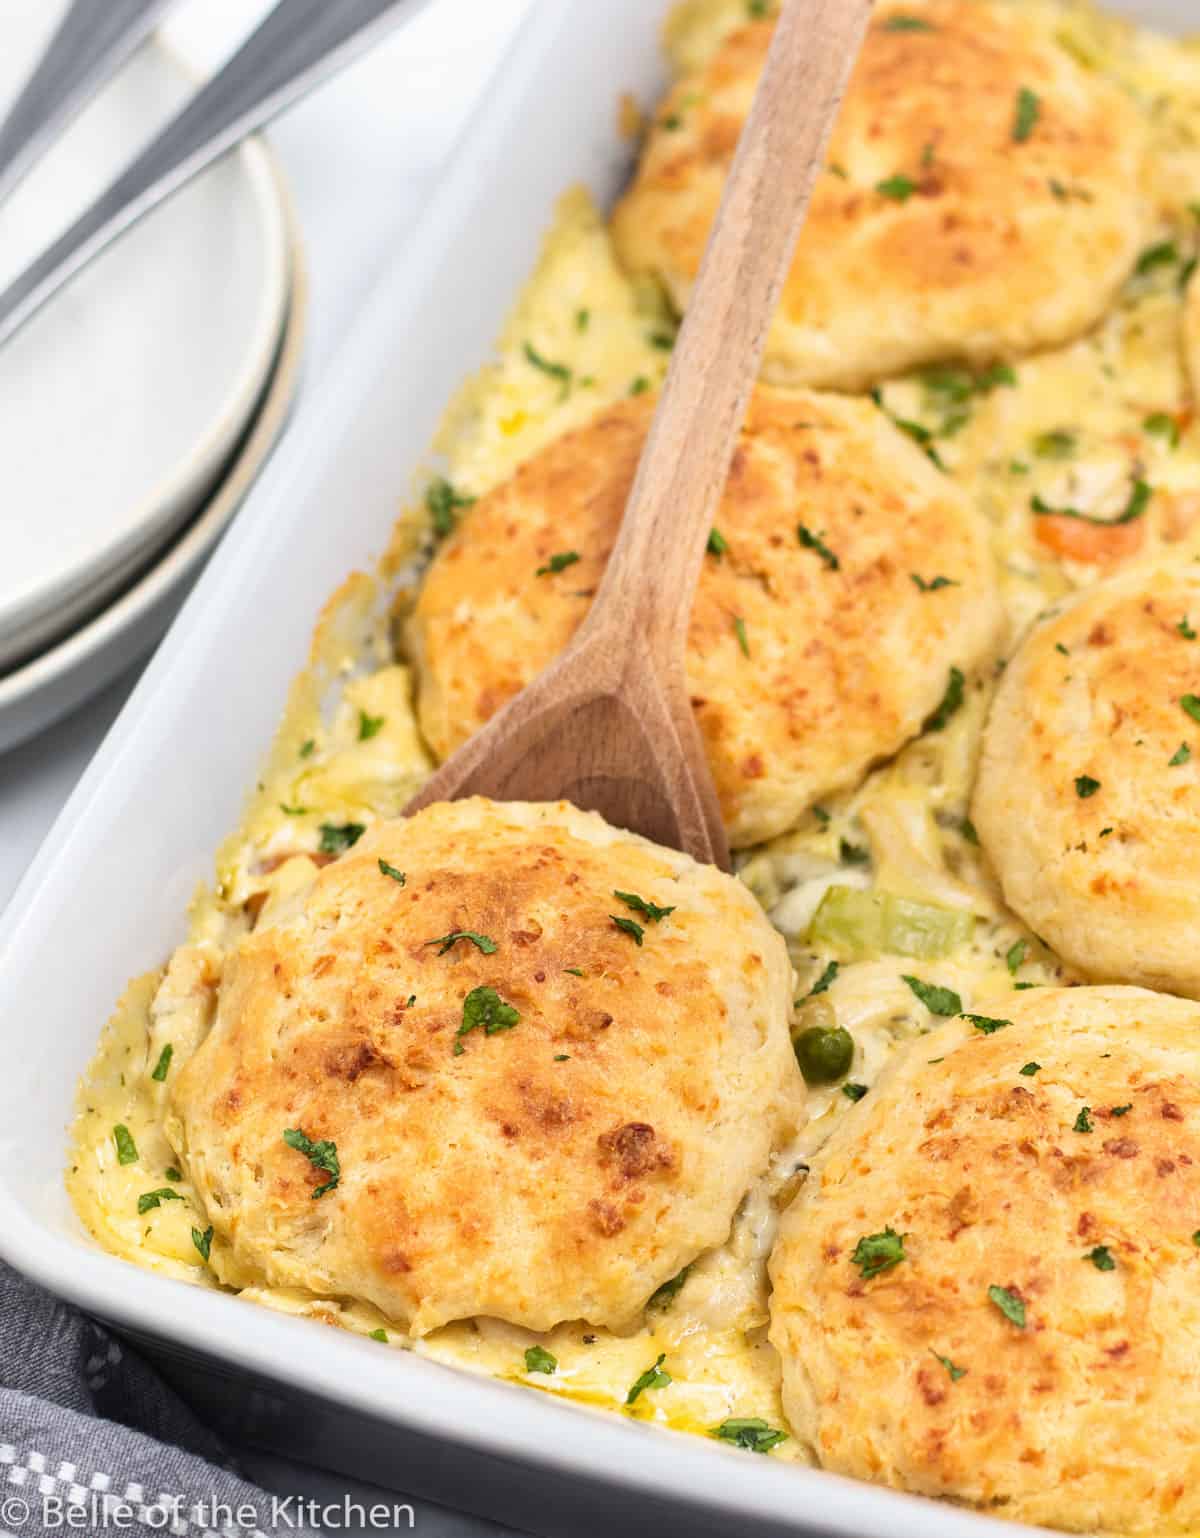 a baking dish of chicken and biscuits.